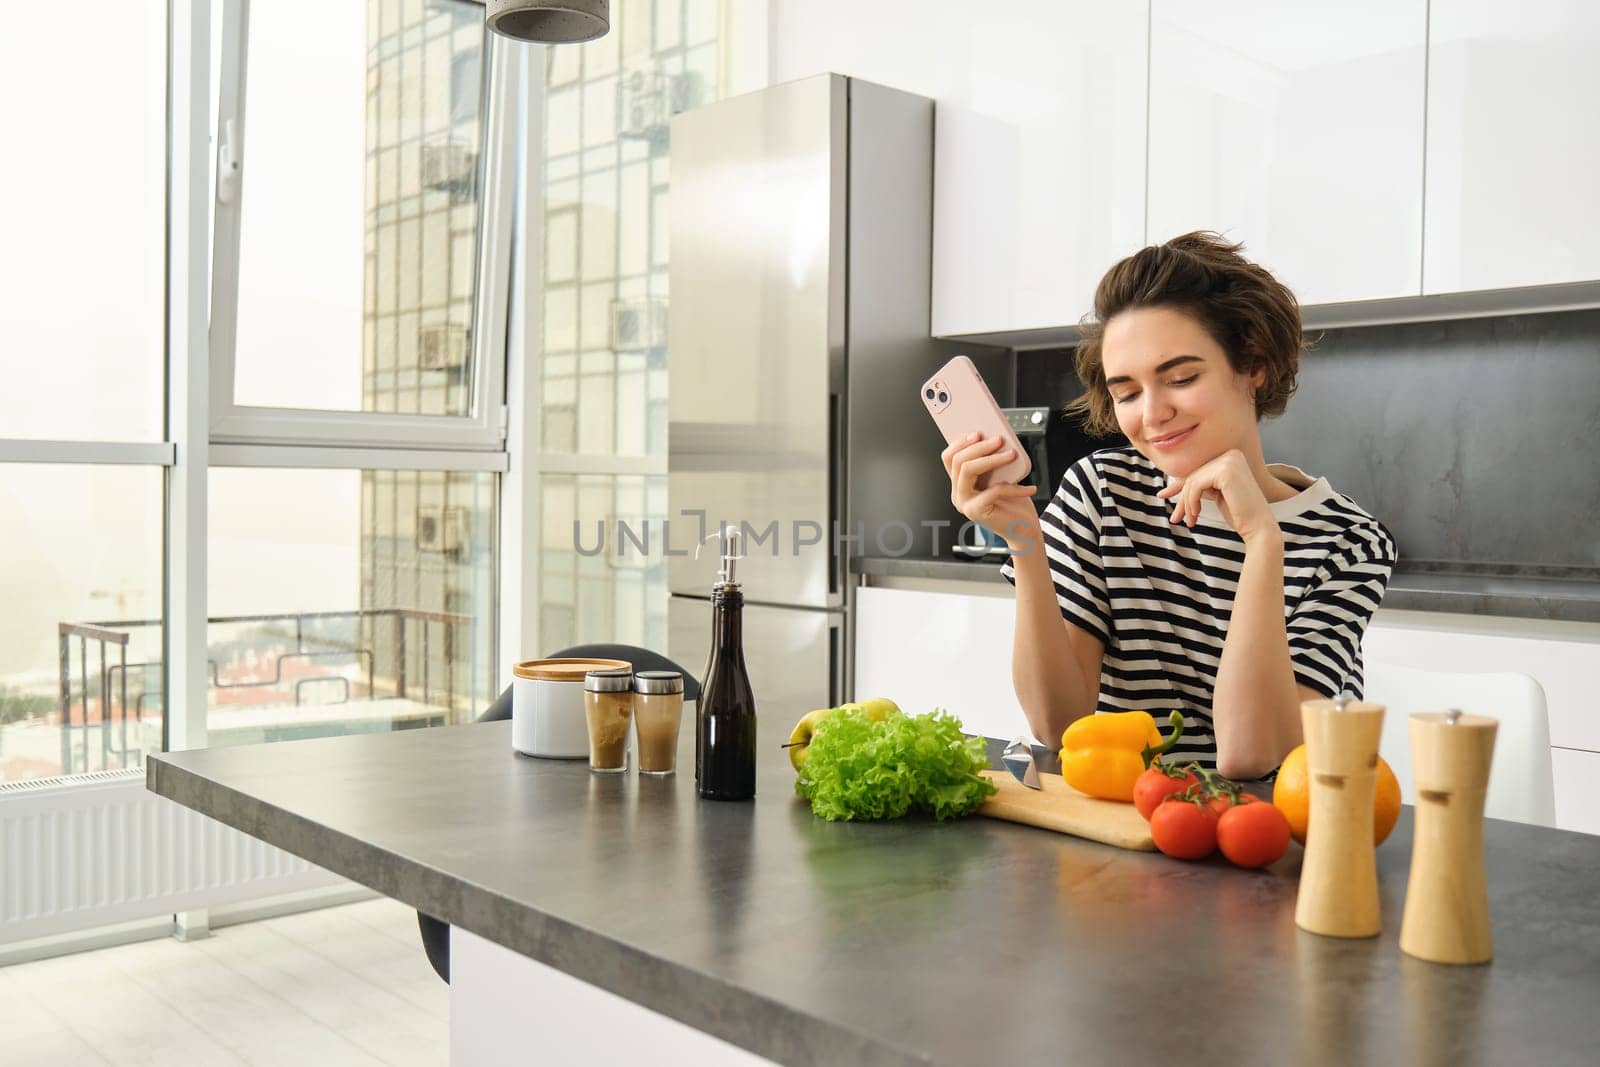 Portrait of smiling beautiful woman in the kitchen, looking at vegetables and holding smartphone, deciding what to cook, searching for ideas for lunch meals.